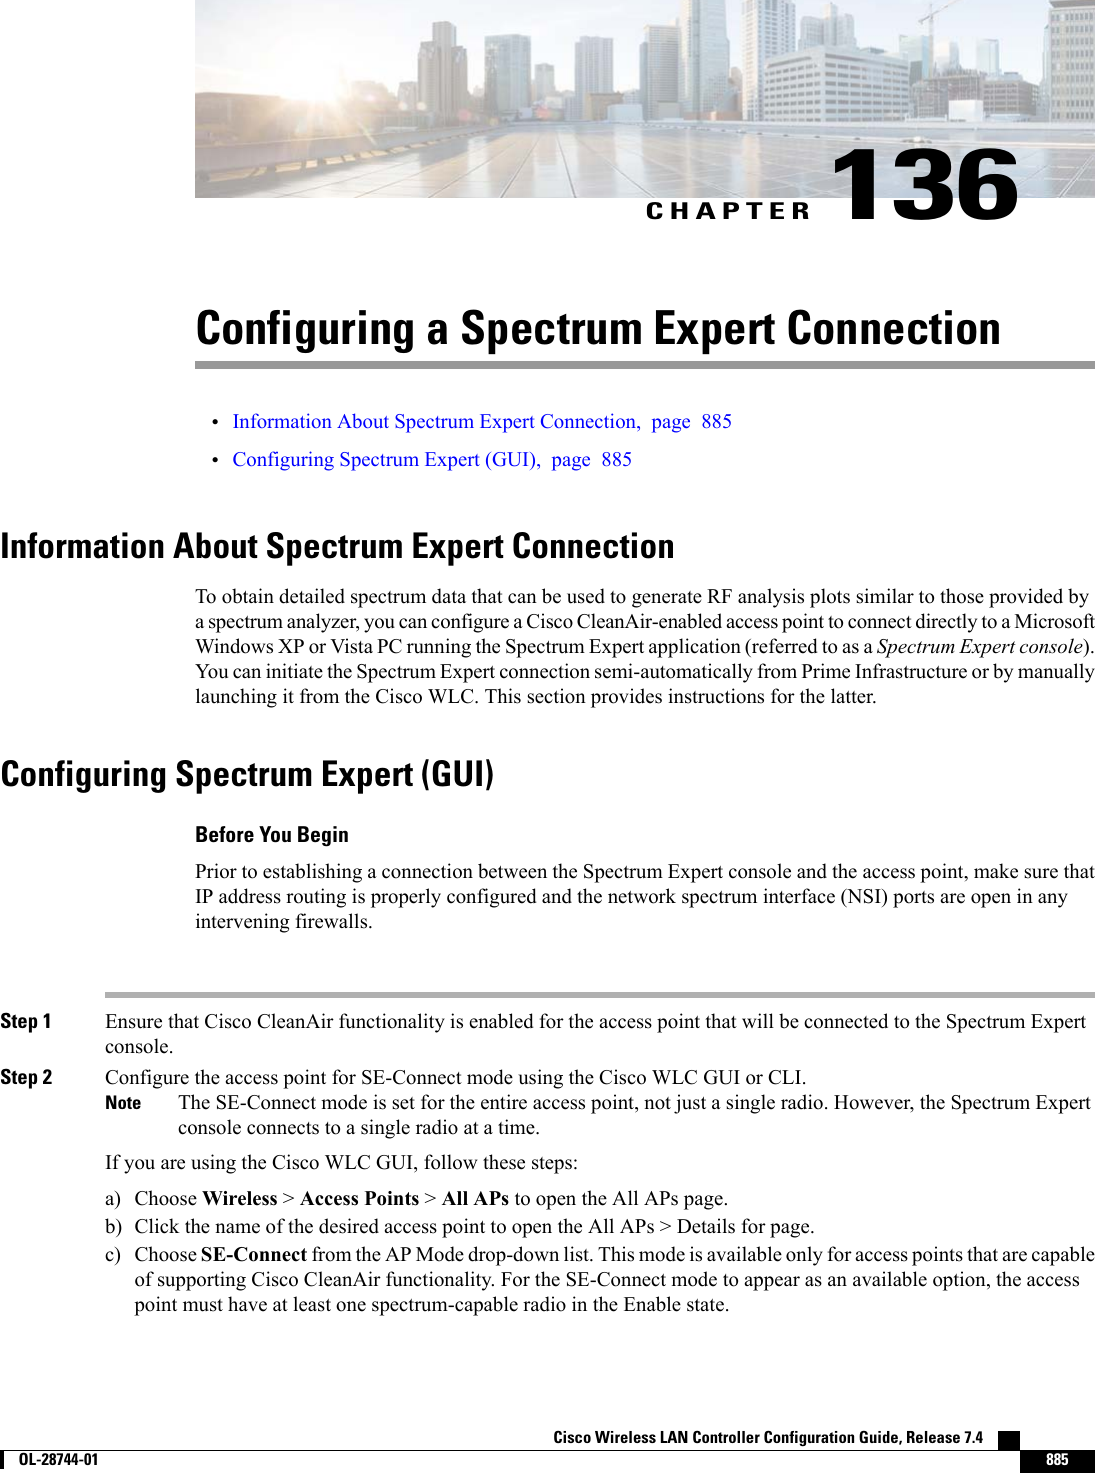 CHAPTER 136Configuring a Spectrum Expert Connection•Information About Spectrum Expert Connection, page 885•Configuring Spectrum Expert (GUI), page 885Information About Spectrum Expert ConnectionTo obtain detailed spectrum data that can be used to generate RF analysis plots similar to those provided bya spectrum analyzer, you can configure a Cisco CleanAir-enabled access point to connect directly to a MicrosoftWindows XP or Vista PC running the Spectrum Expert application (referred to as a Spectrum Expert console).You can initiate the Spectrum Expert connection semi-automatically from Prime Infrastructure or by manuallylaunching it from the Cisco WLC. This section provides instructions for the latter.Configuring Spectrum Expert (GUI)Before You BeginPrior to establishing a connection between the Spectrum Expert console and the access point, make sure thatIP address routing is properly configured and the network spectrum interface (NSI) ports are open in anyintervening firewalls.Step 1 Ensure that Cisco CleanAir functionality is enabled for the access point that will be connected to the Spectrum Expertconsole.Step 2 Configure the access point for SE-Connect mode using the Cisco WLC GUI or CLI.The SE-Connect mode is set for the entire access point, not just a single radio. However, the Spectrum Expertconsole connects to a single radio at a time.NoteIf you are using the Cisco WLC GUI, follow these steps:a) Choose Wireless &gt;Access Points &gt;All APs to open the All APs page.b) Click the name of the desired access point to open the All APs &gt; Details for page.c) Choose SE-Connect from the AP Mode drop-down list. This mode is available only for access points that are capableof supporting Cisco CleanAir functionality. For the SE-Connect mode to appear as an available option, the accesspoint must have at least one spectrum-capable radio in the Enable state.Cisco Wireless LAN Controller Configuration Guide, Release 7.4        OL-28744-01 885